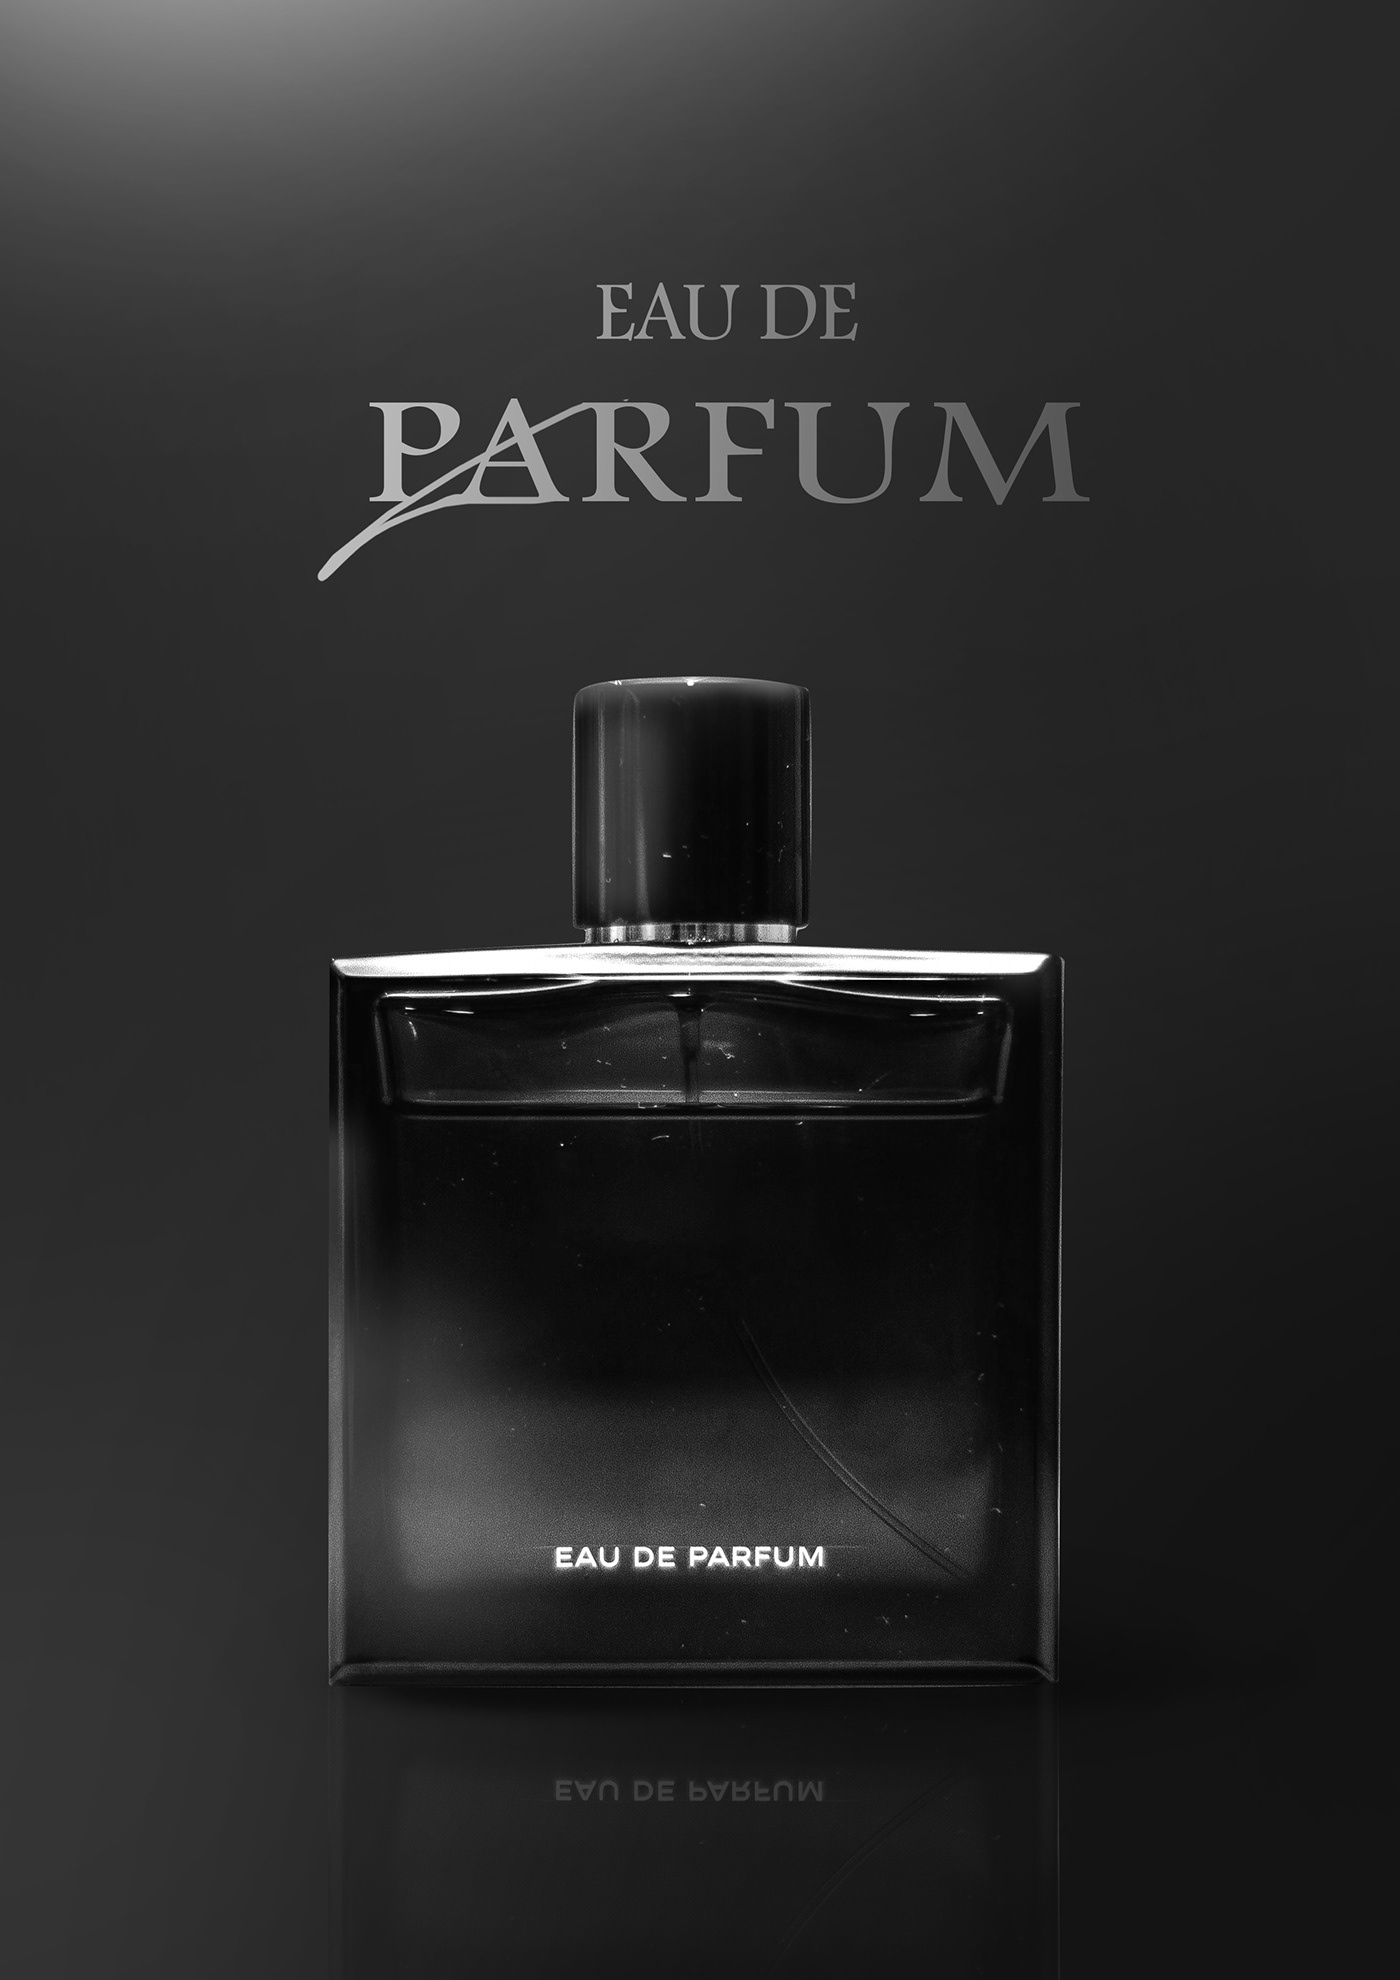 poster design Advertising  perfume perfume bottle Packaging visual design art direction  Photography  photomanipulations